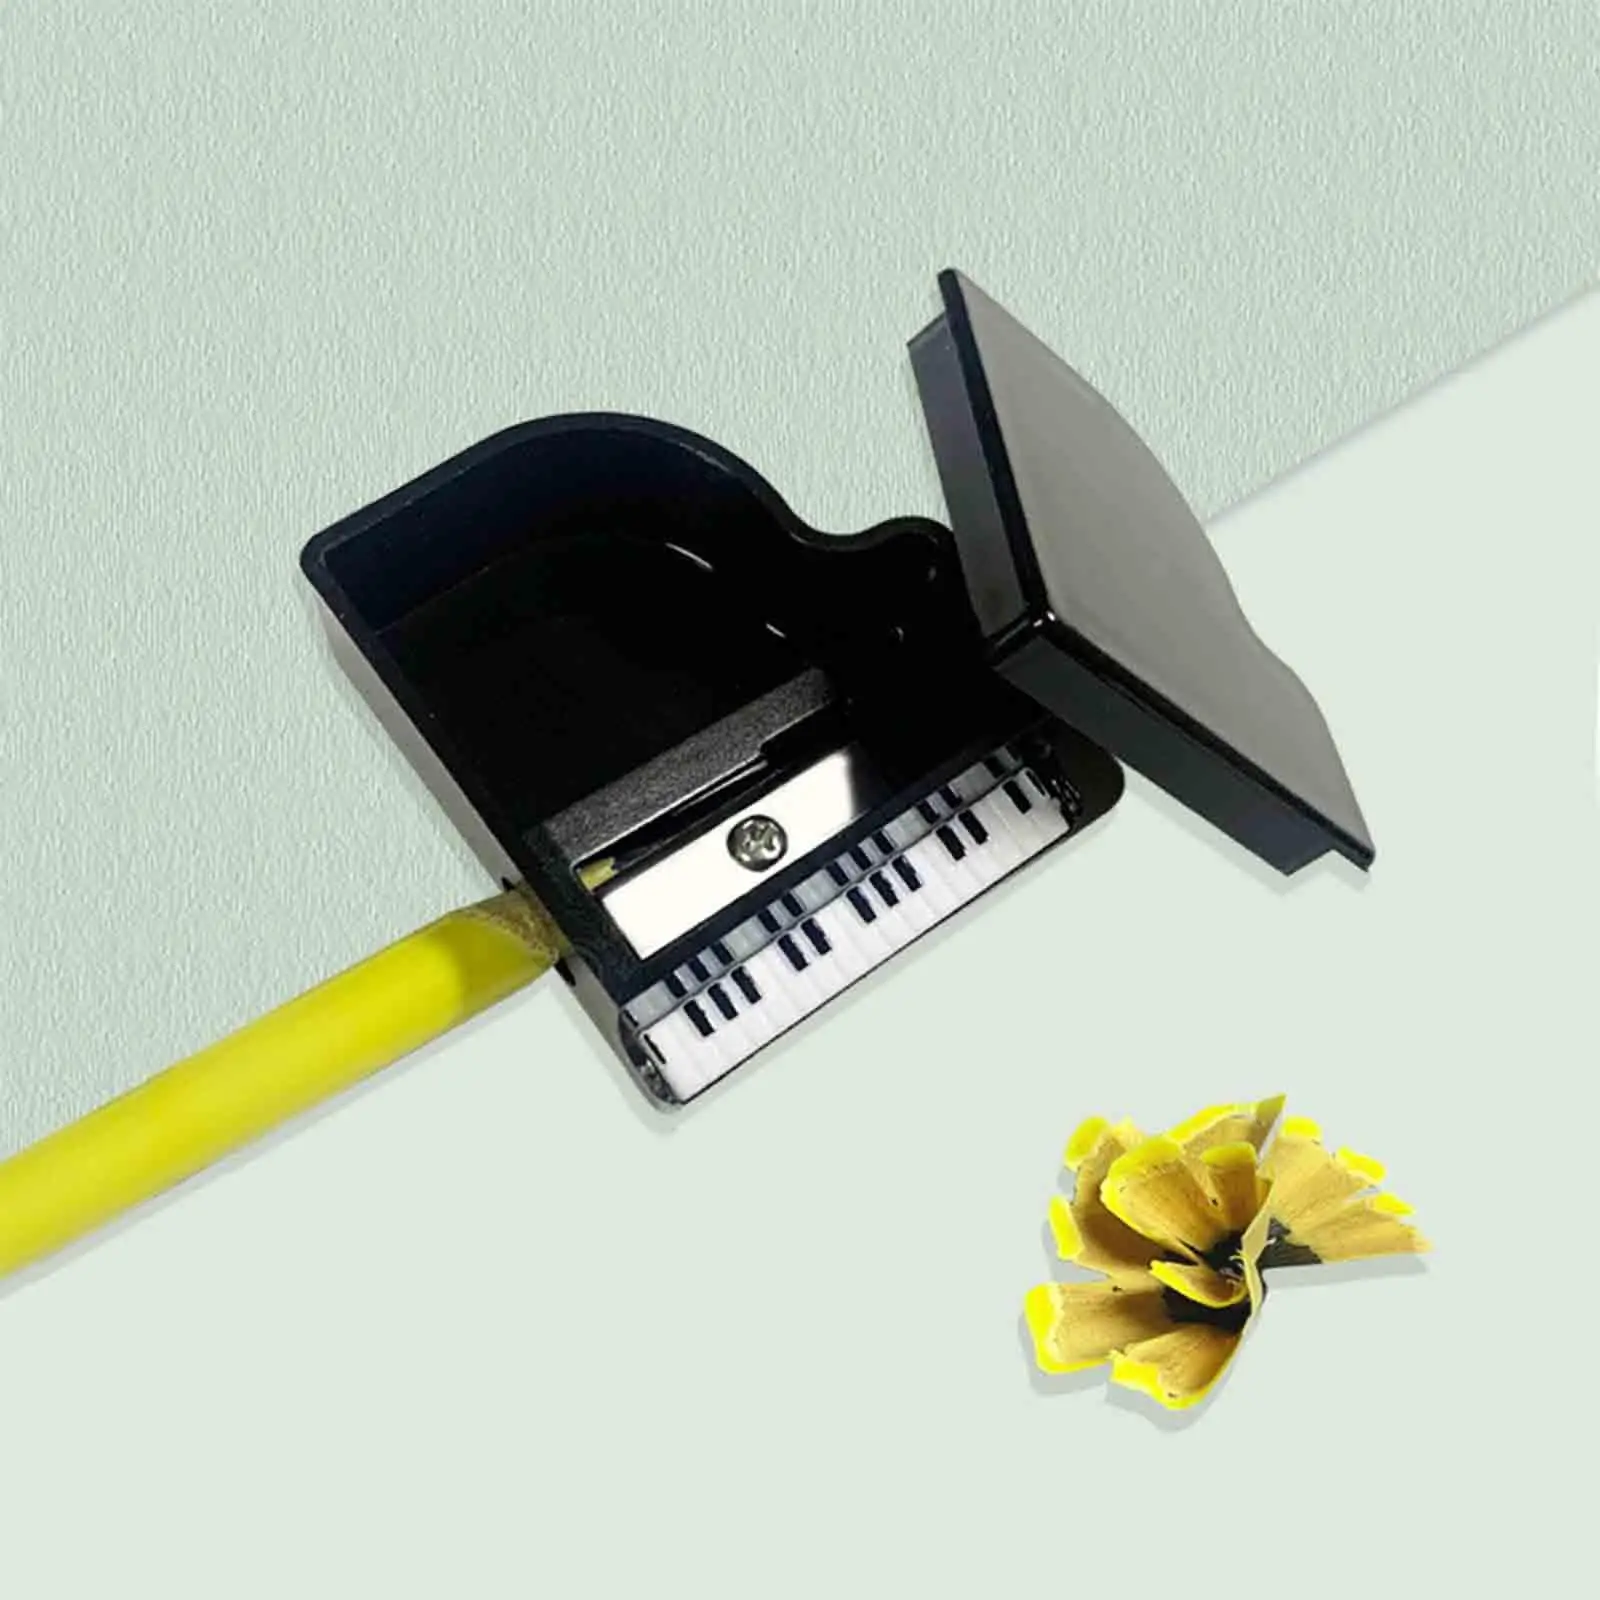 

Piano Shaped Pencil Sharpener Pencil Sharpener for Colored Pencils Music Stationery for School Office Children Students Artists